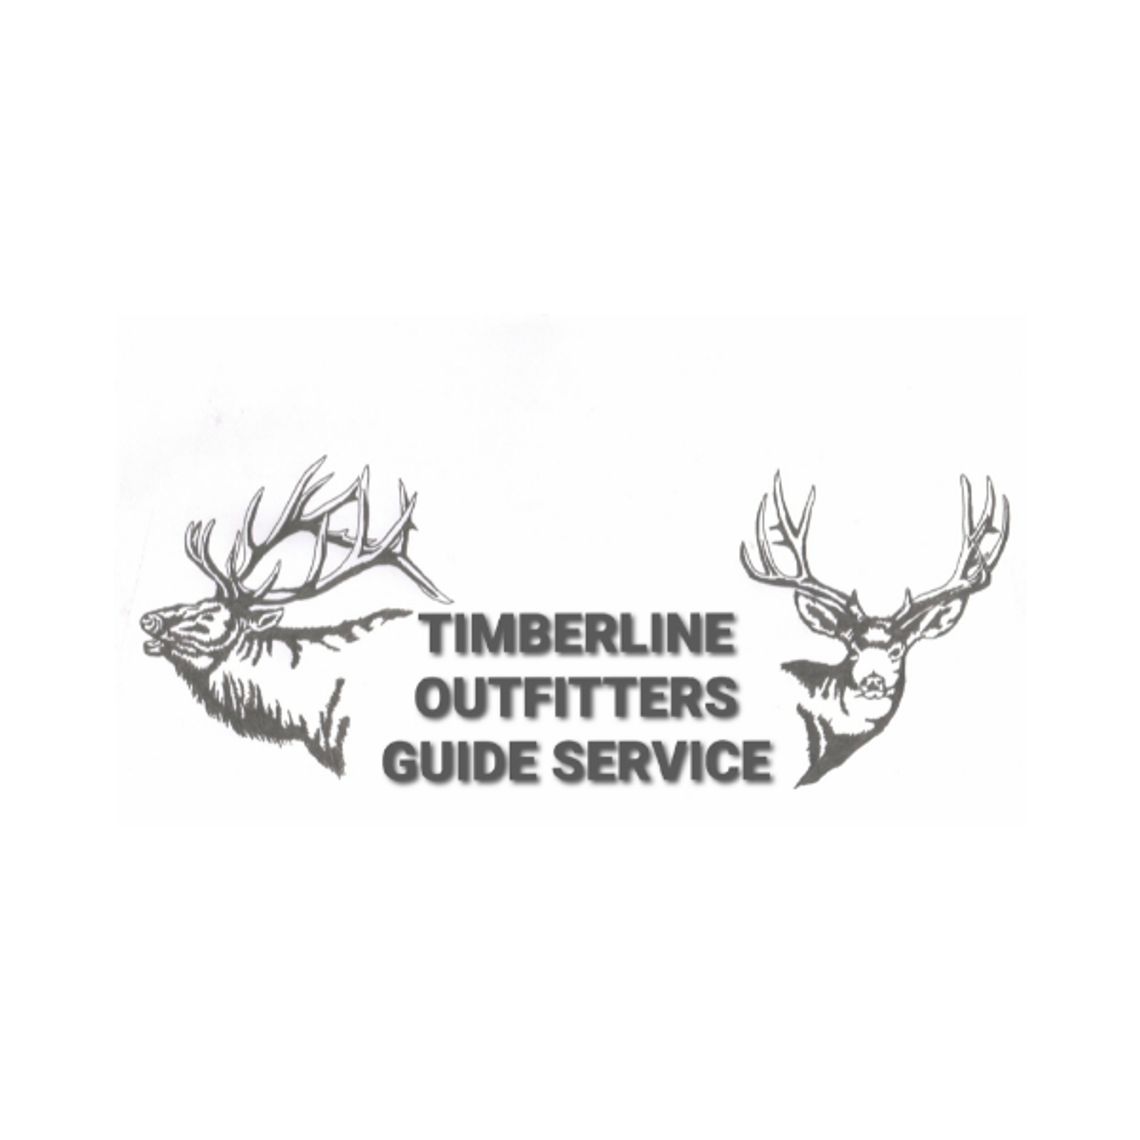 Timberline Outfitters Guide Service